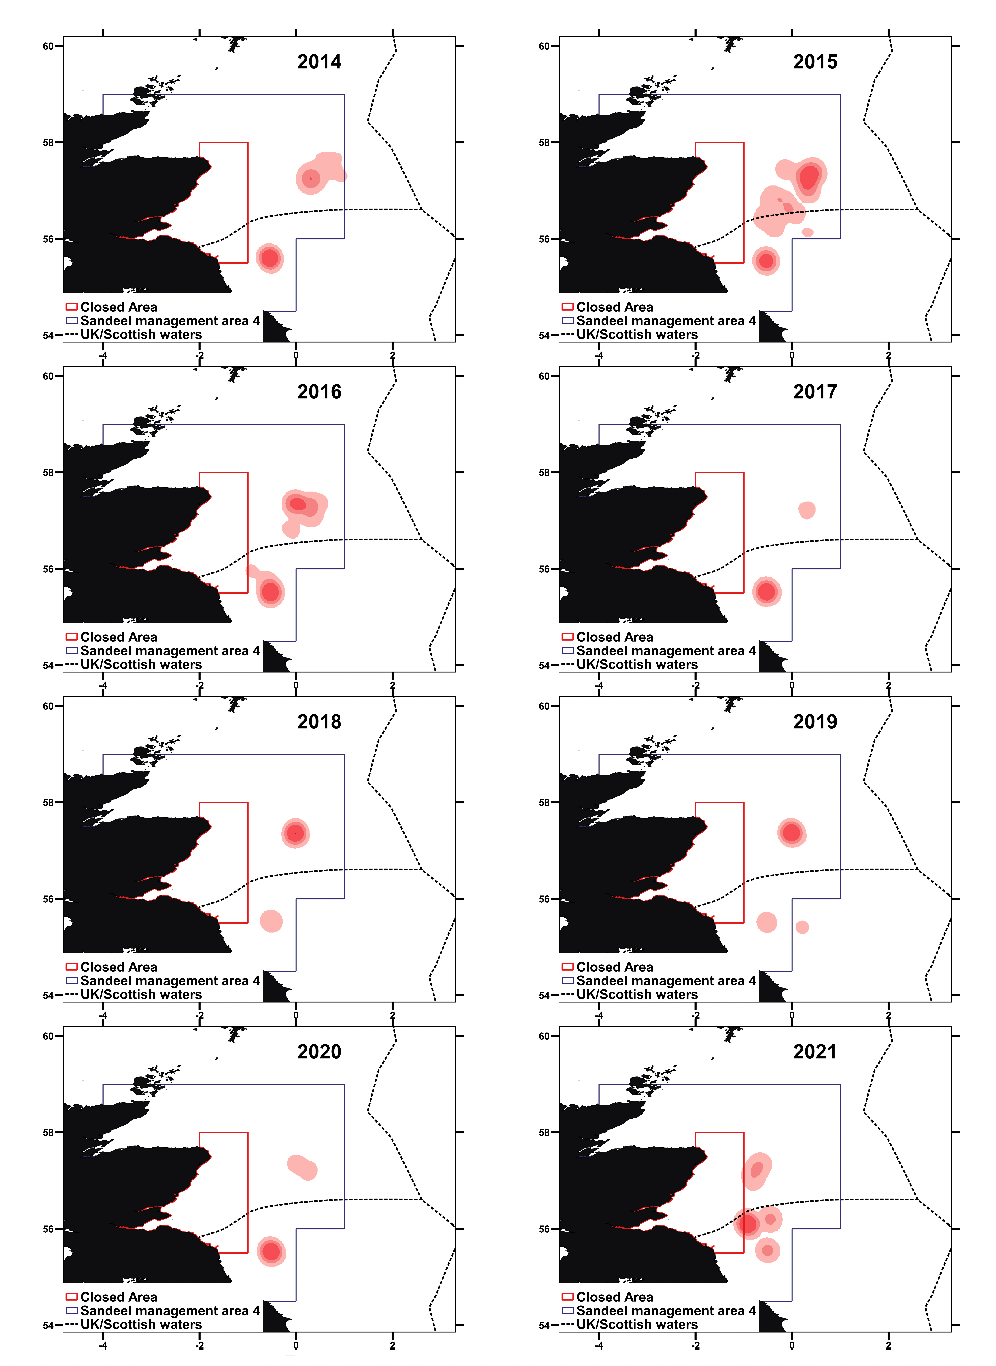 Eight individual heatmaps of the North Sea, depicting fishing vessel intensity within Area 4 from 2014 to 2021. Two fishing hotspots, one to the east of Aberdeen and one further south near the border with England, are consistent through the years. 2021 shows a westward shift in this activity closer to the closed area boundary.